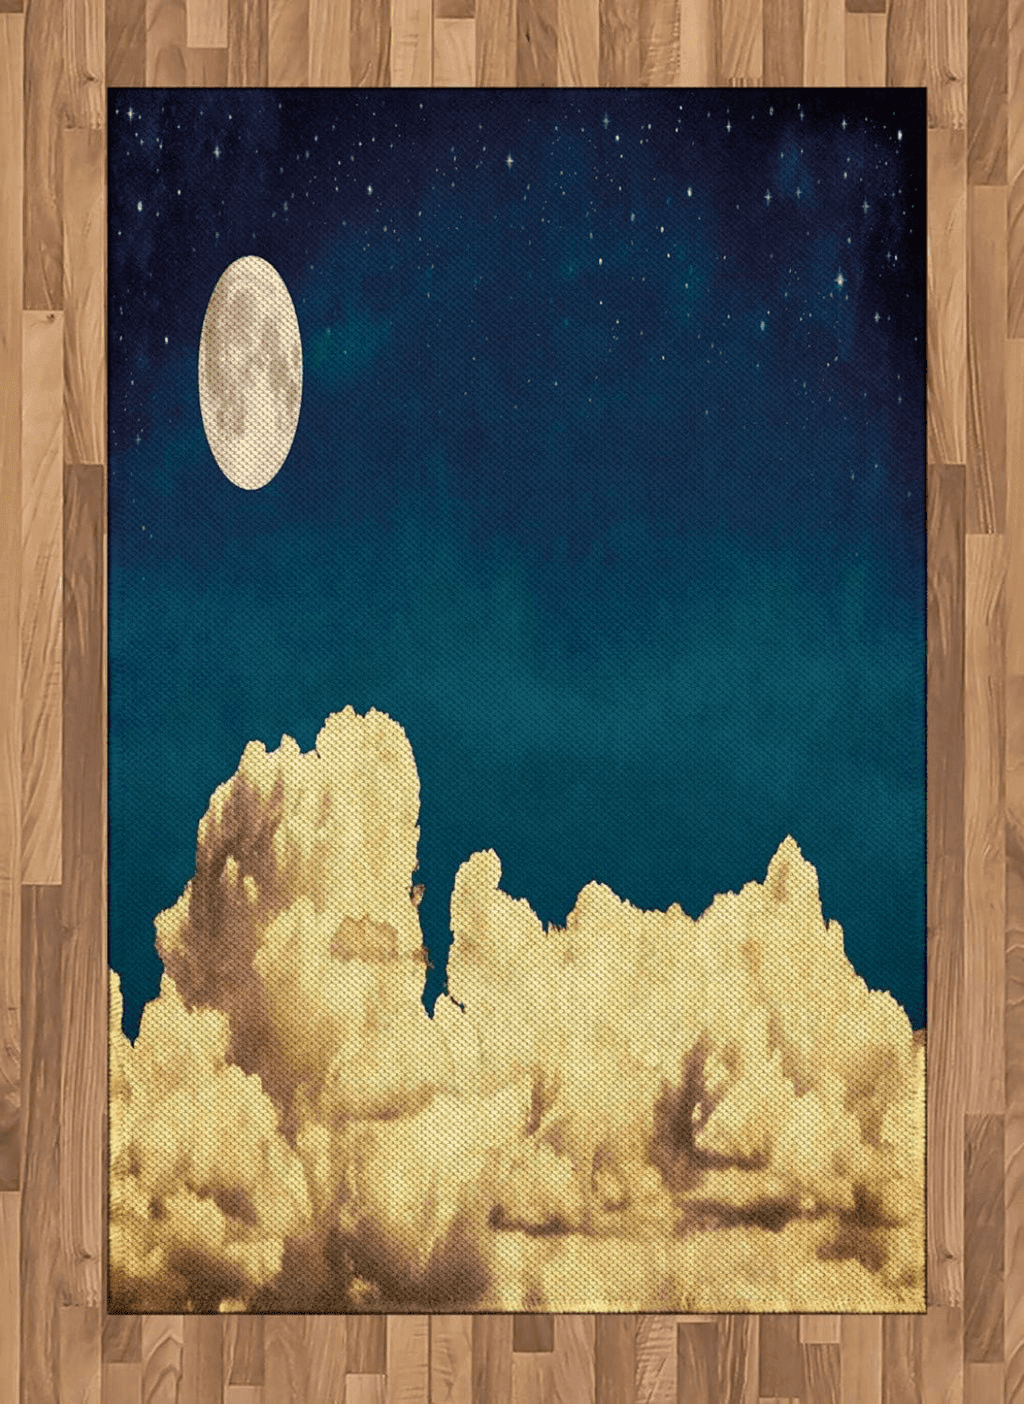 Fluffy Yellow Ambesonne Night Sky Area Rug, Fantasy Sky Stars Full Moon and Fluffy Clouds Vintage Style Artwork Picture, Flat Woven Accent Rug for Living Room Bedroom Dining Room, 4' X 5' 7", Dark Blue White